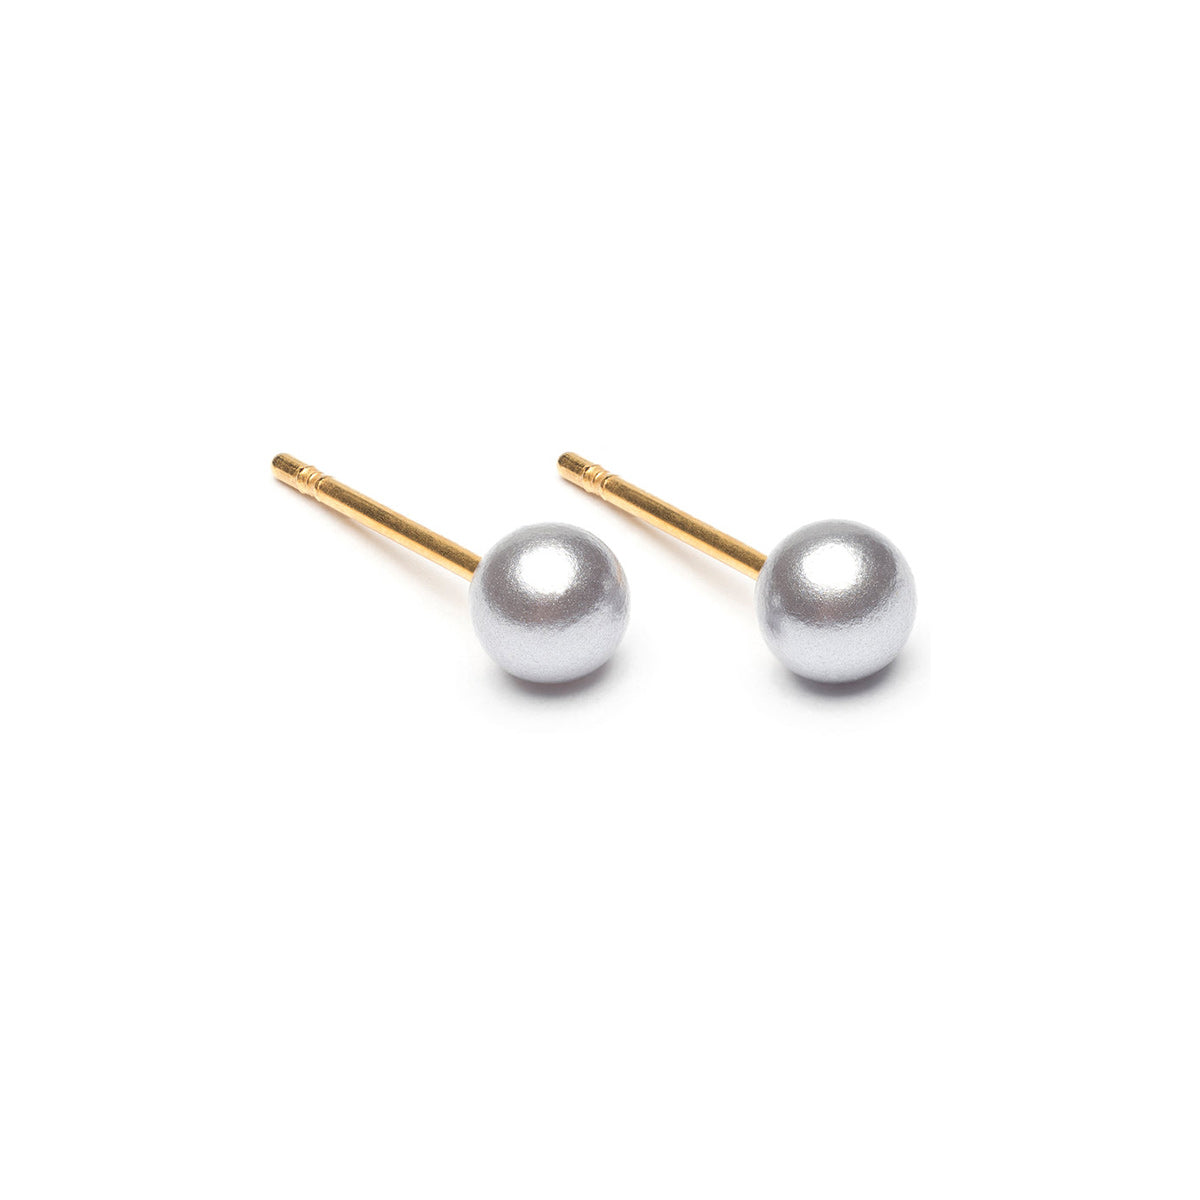 Gold Plated 4 mm Gray Pearl Stud Earrings - Simply Whispers